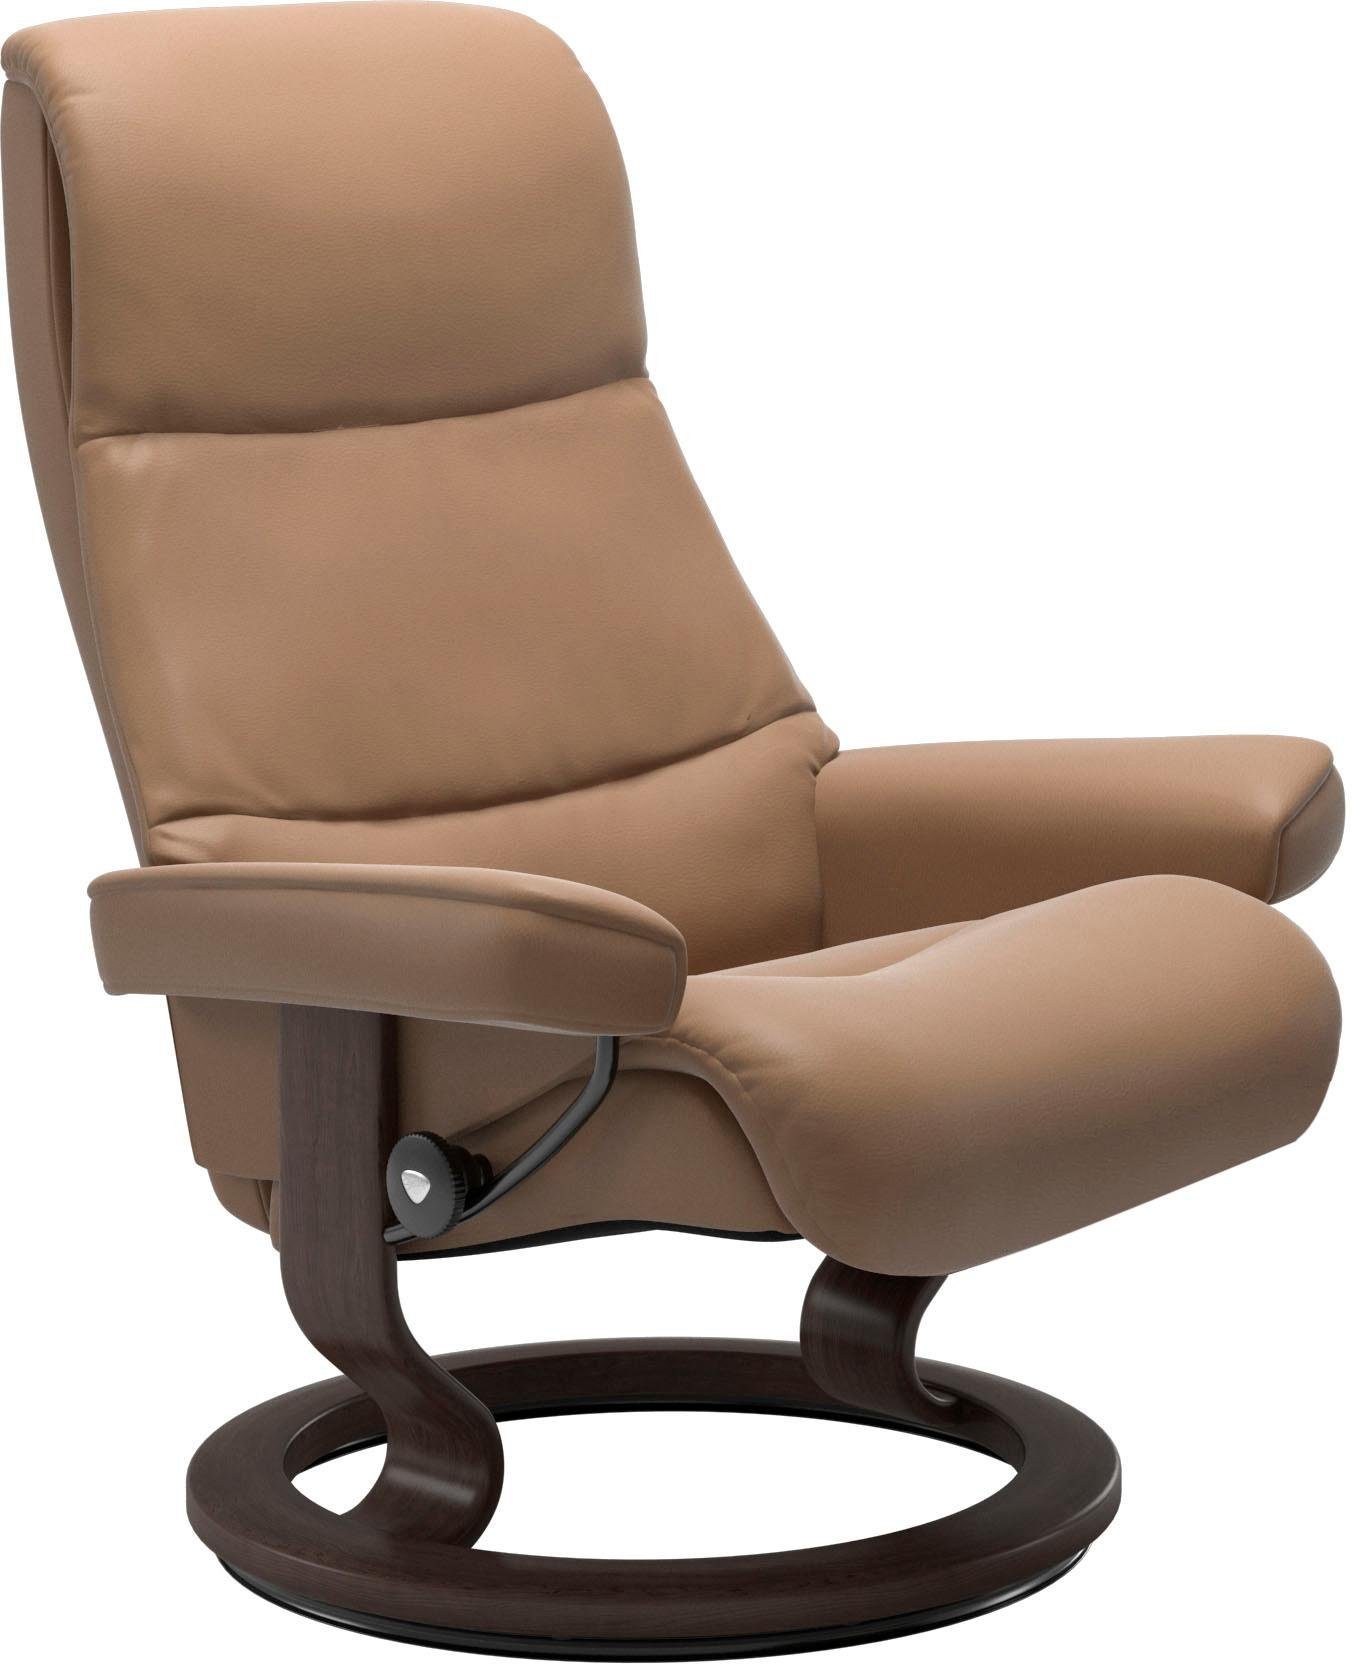 Stressless® Relaxsessel Classic mit Größe Base, M,Gestell View, Wenge